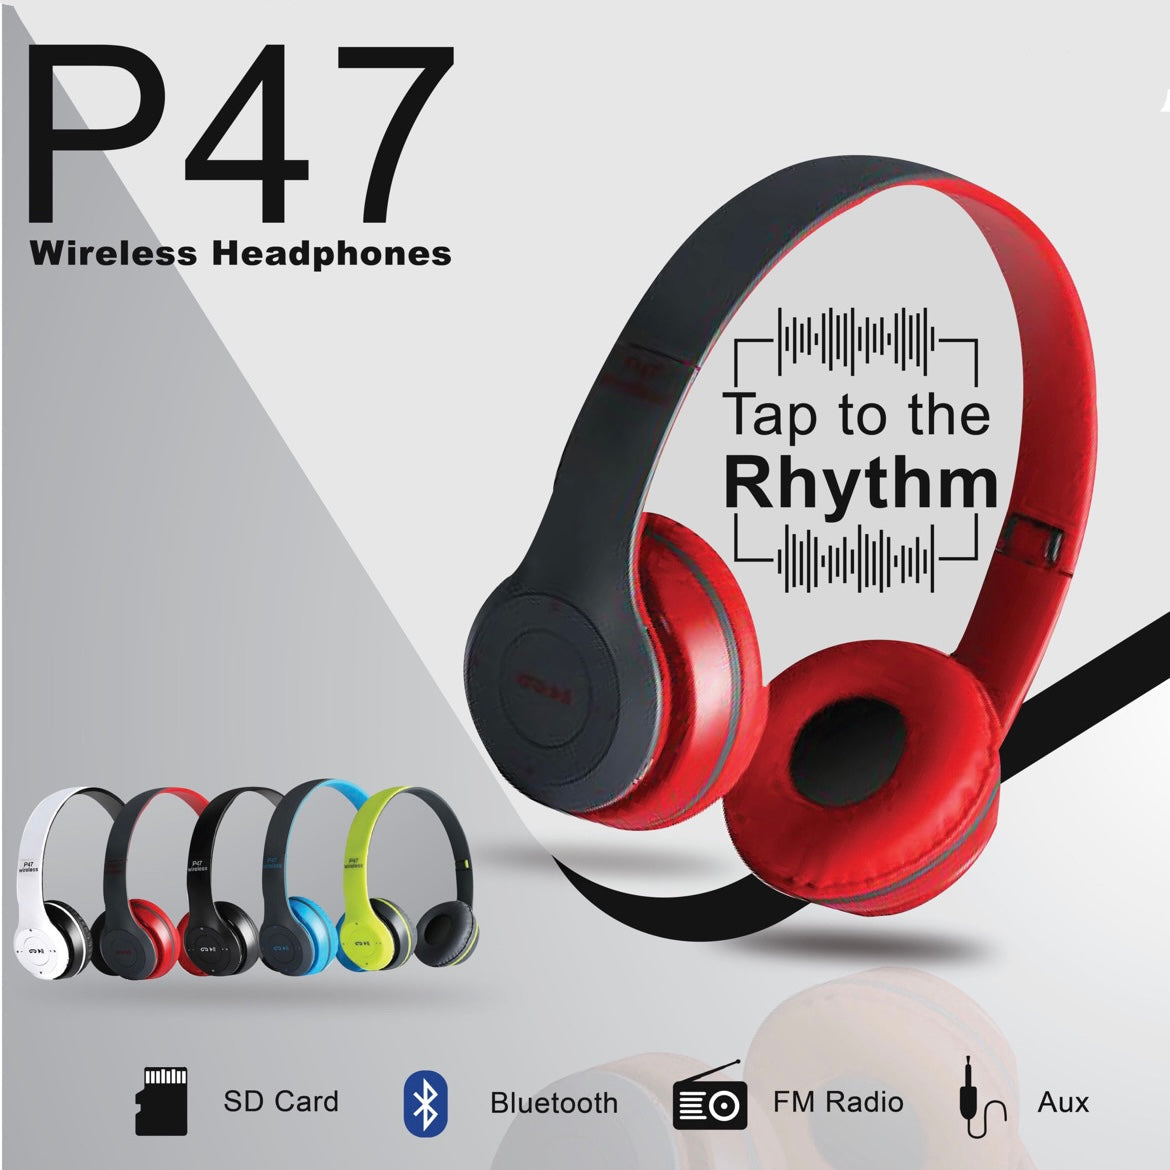 ORIGINAL P47 HIGH BASS WIRELESS BLUETOOTH FOLDABLE HEADPHONE WITH MICROPHONE SUPPORT